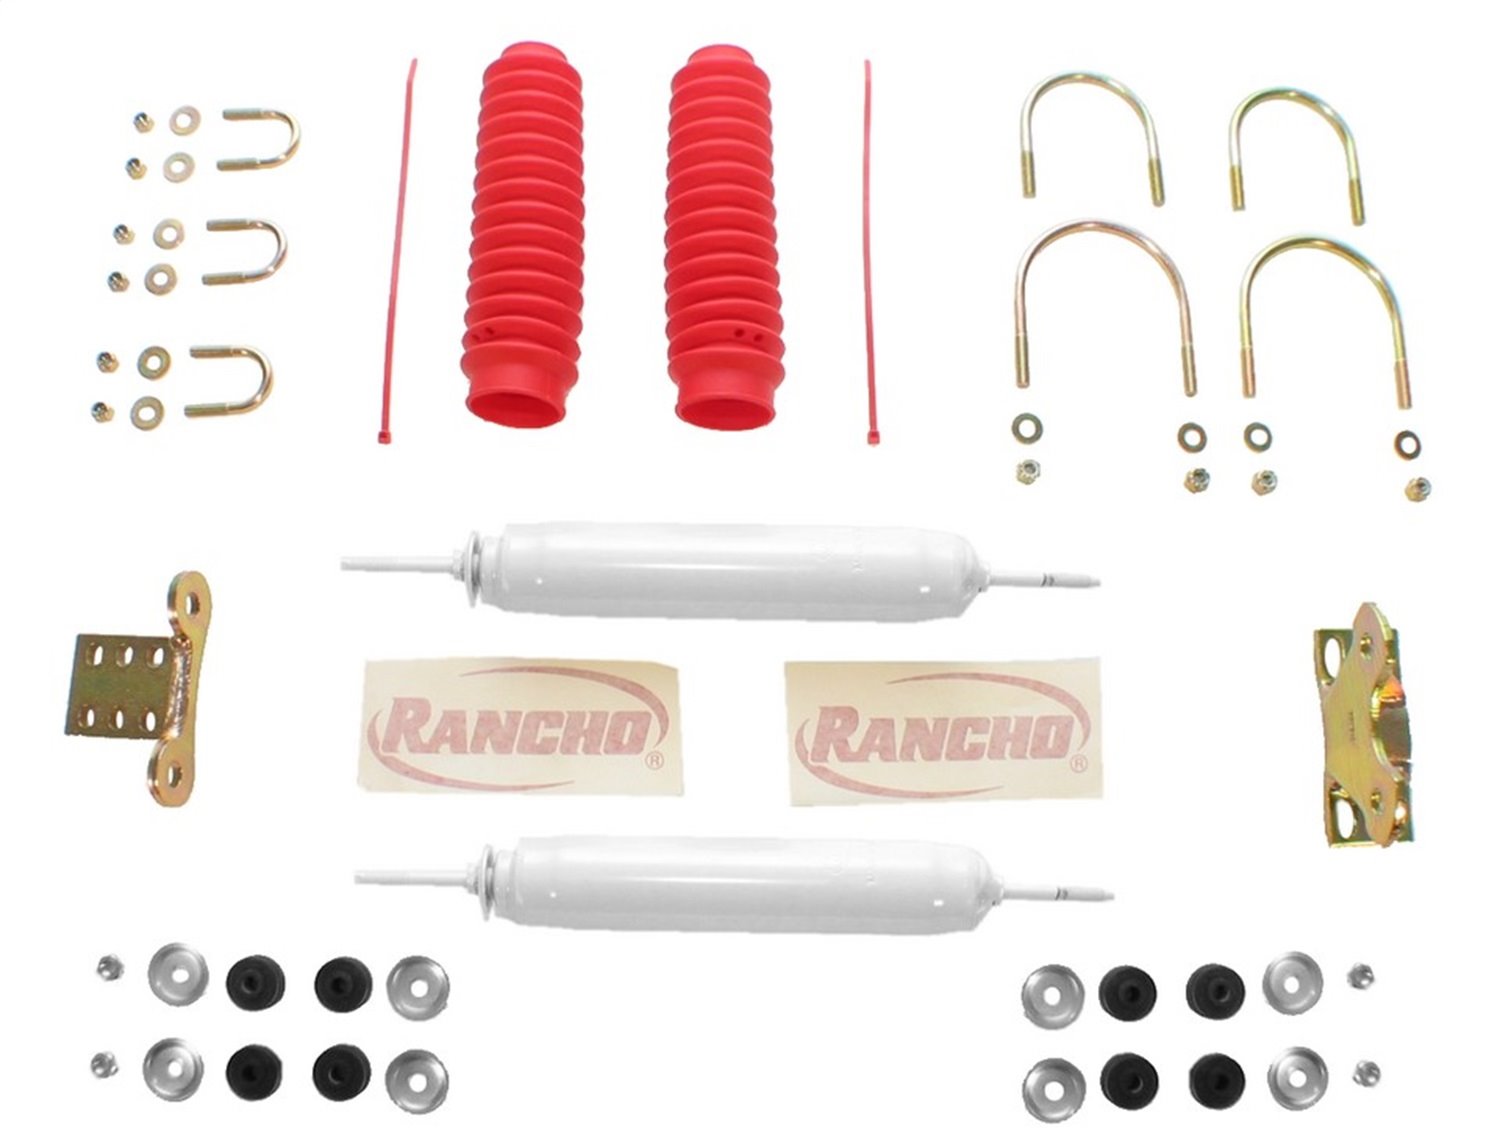 Rancho dual steering stabilizer jeep #3